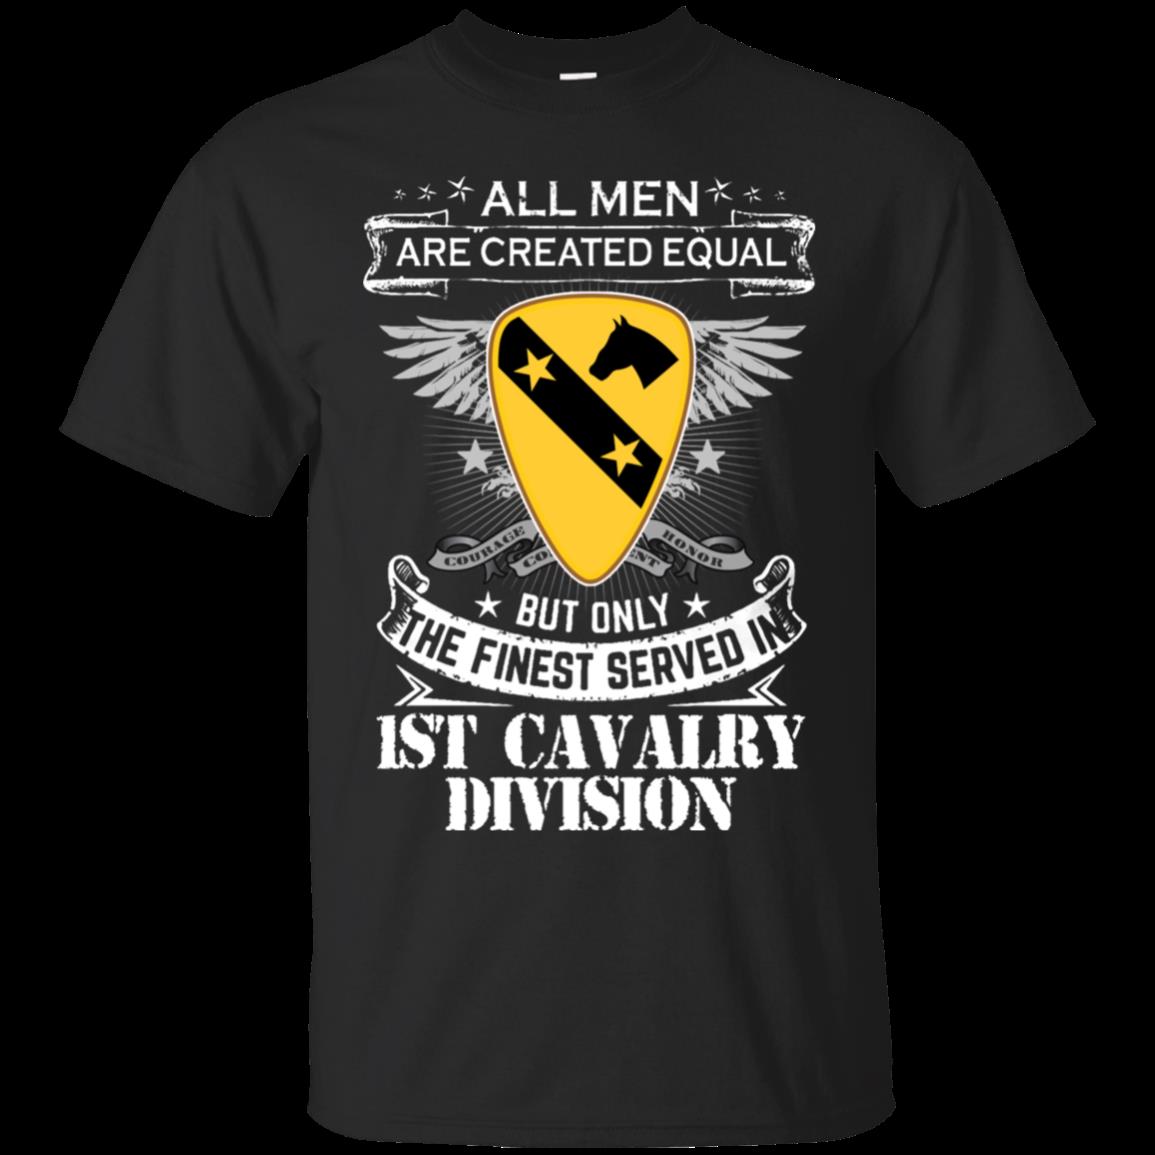 1st Cavalry Division Men Shirts Only The Finest Served